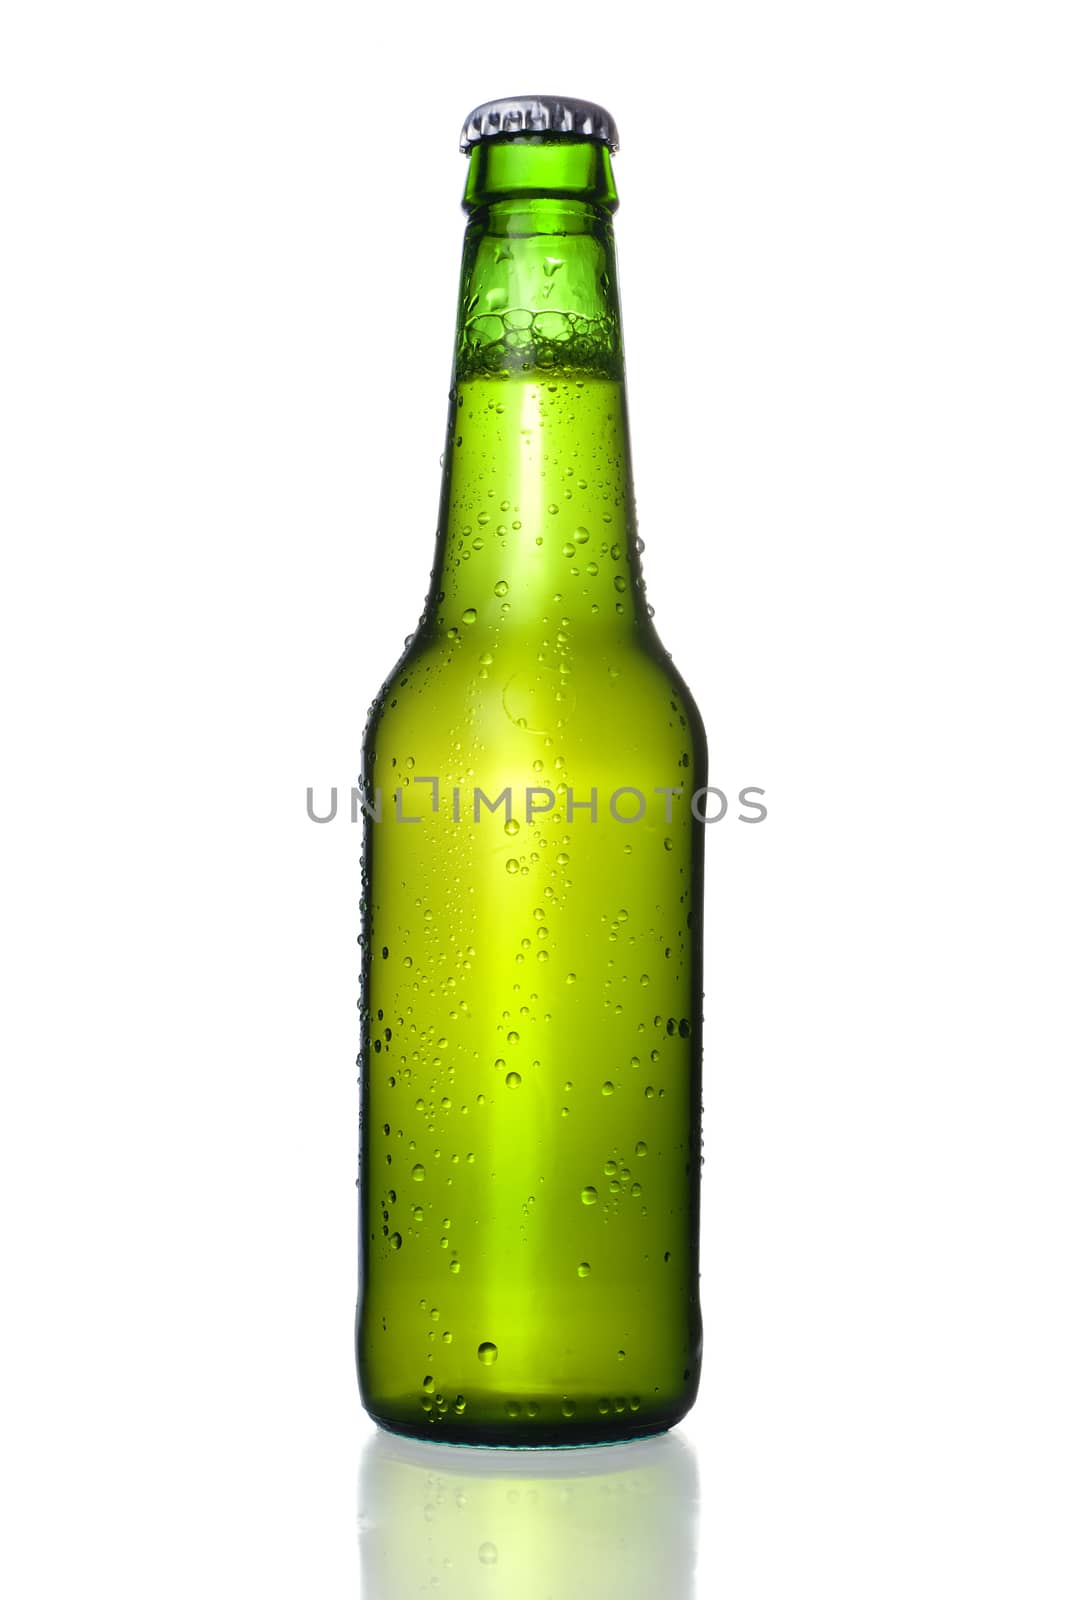 Cold Frosted Beer Bottle on White Background by ocusfocus